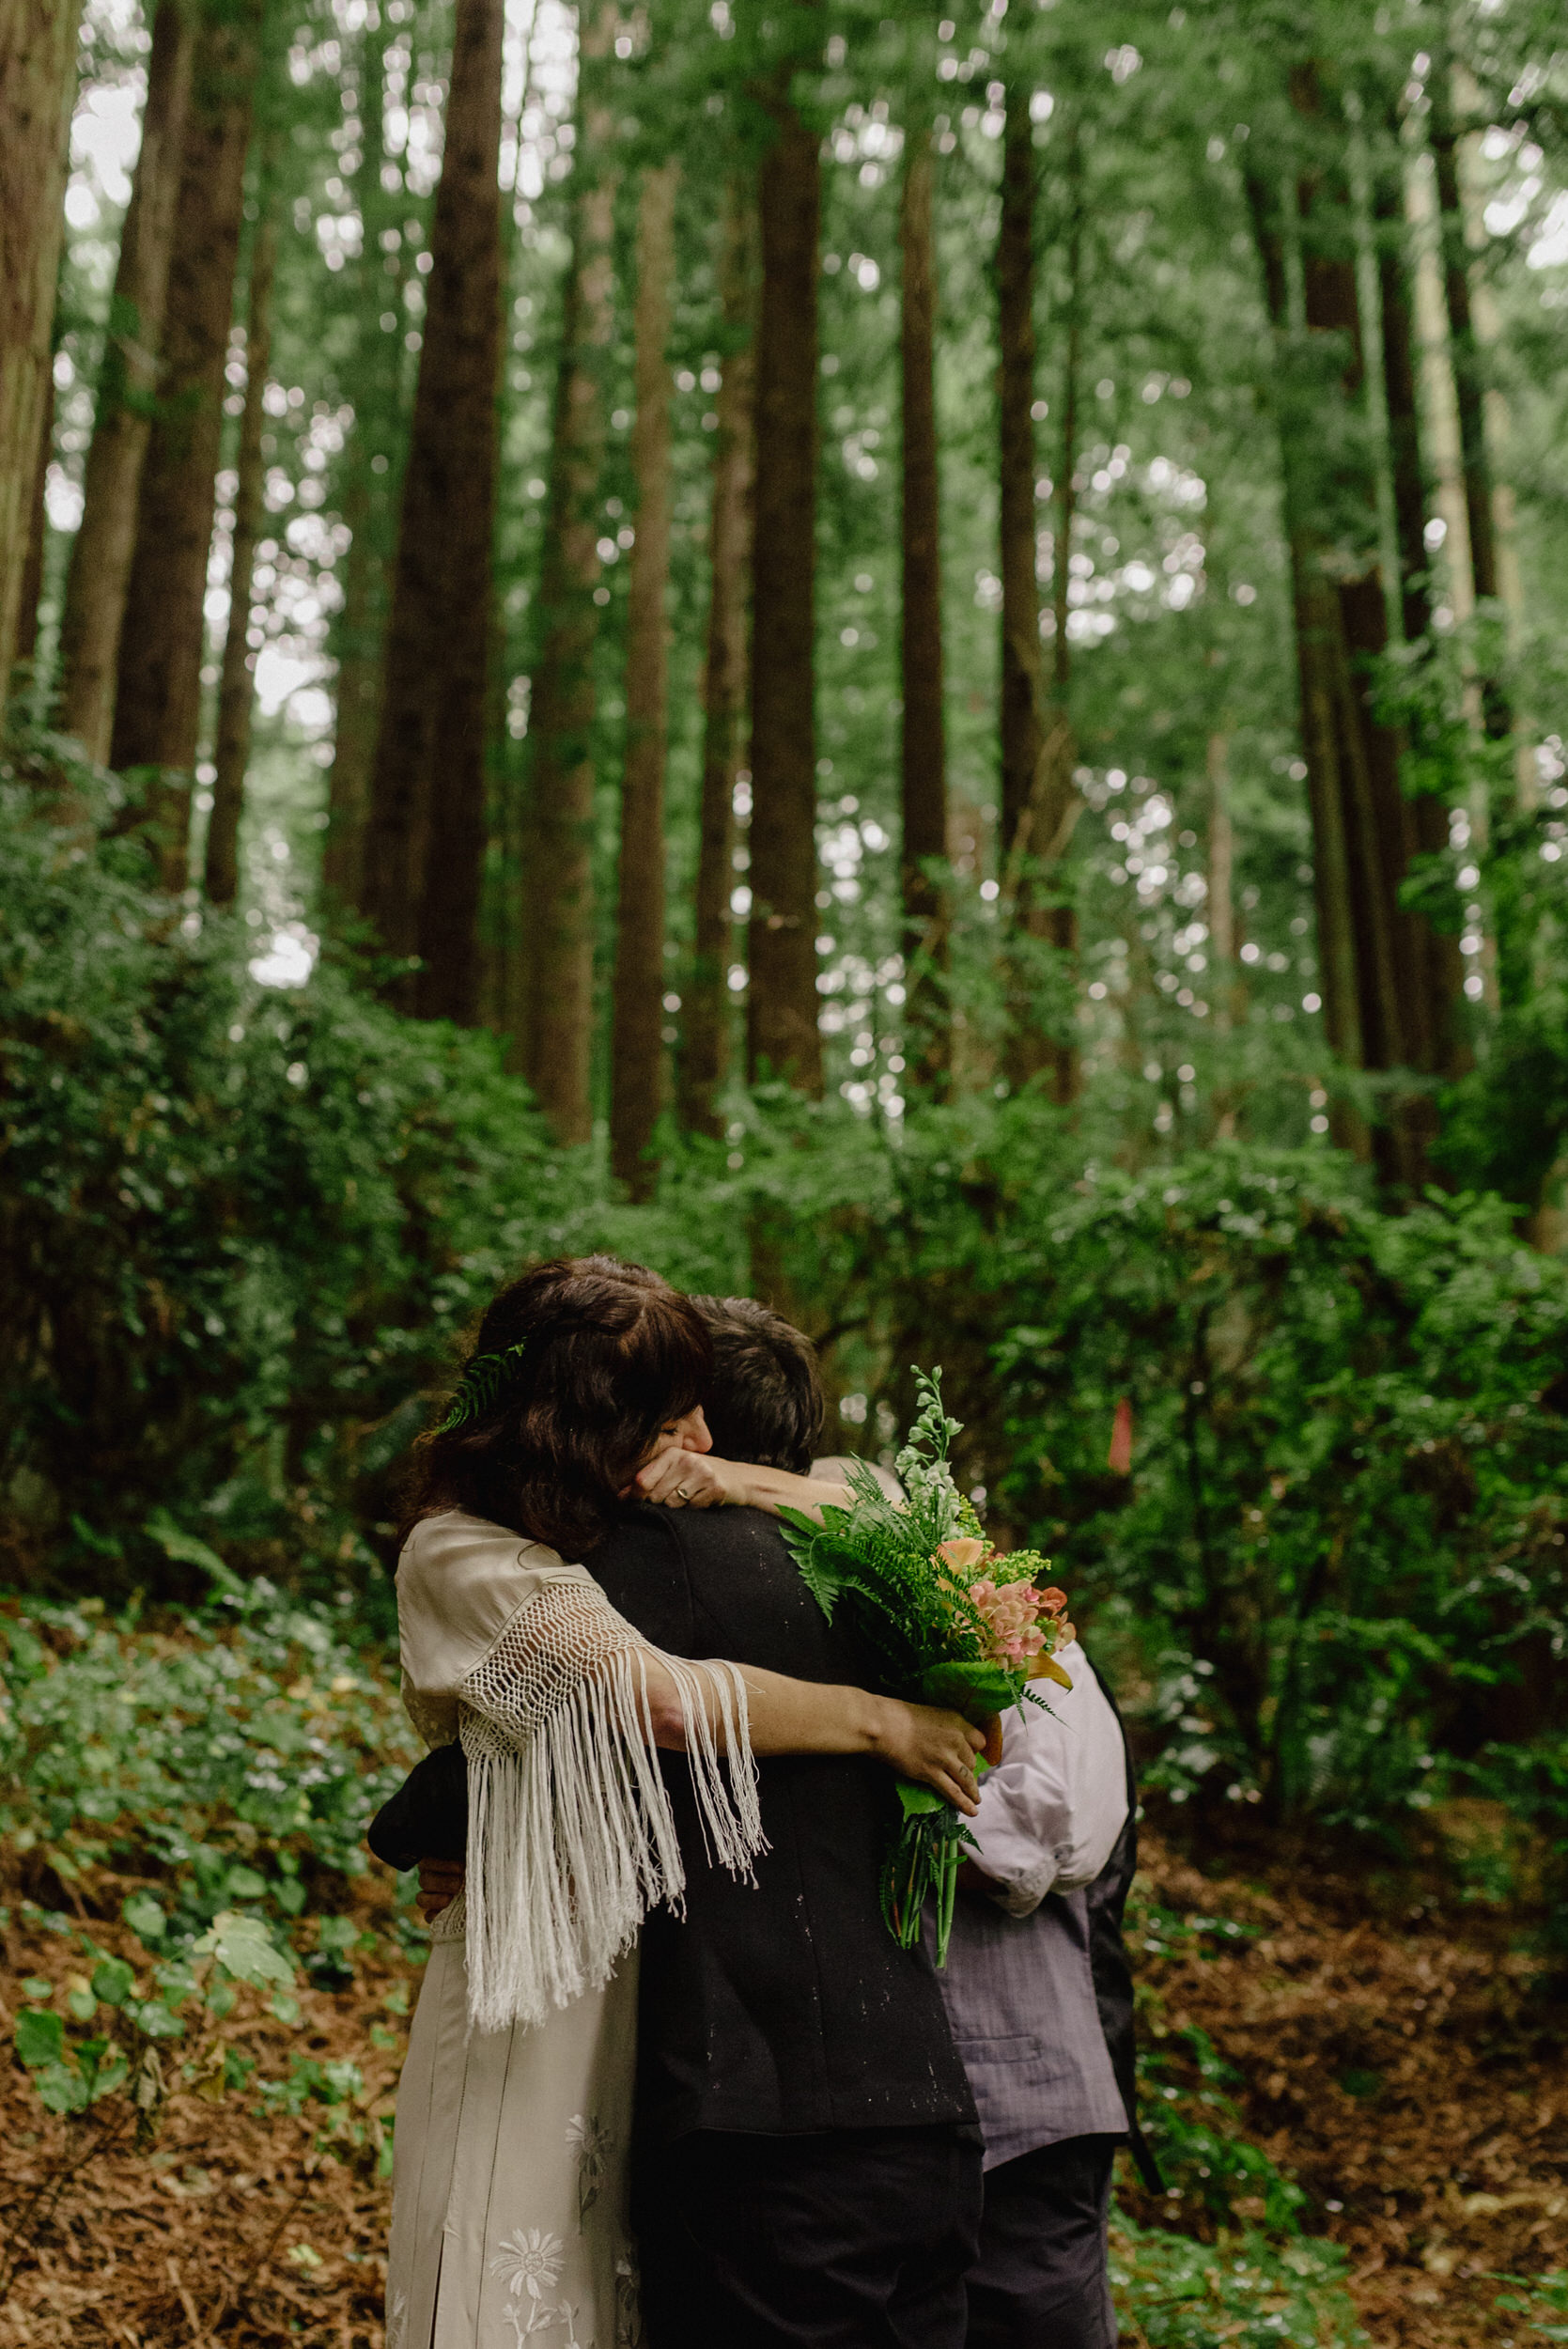 Two brides hug following Humboldt wedding ceremony in Northern California redwood forest